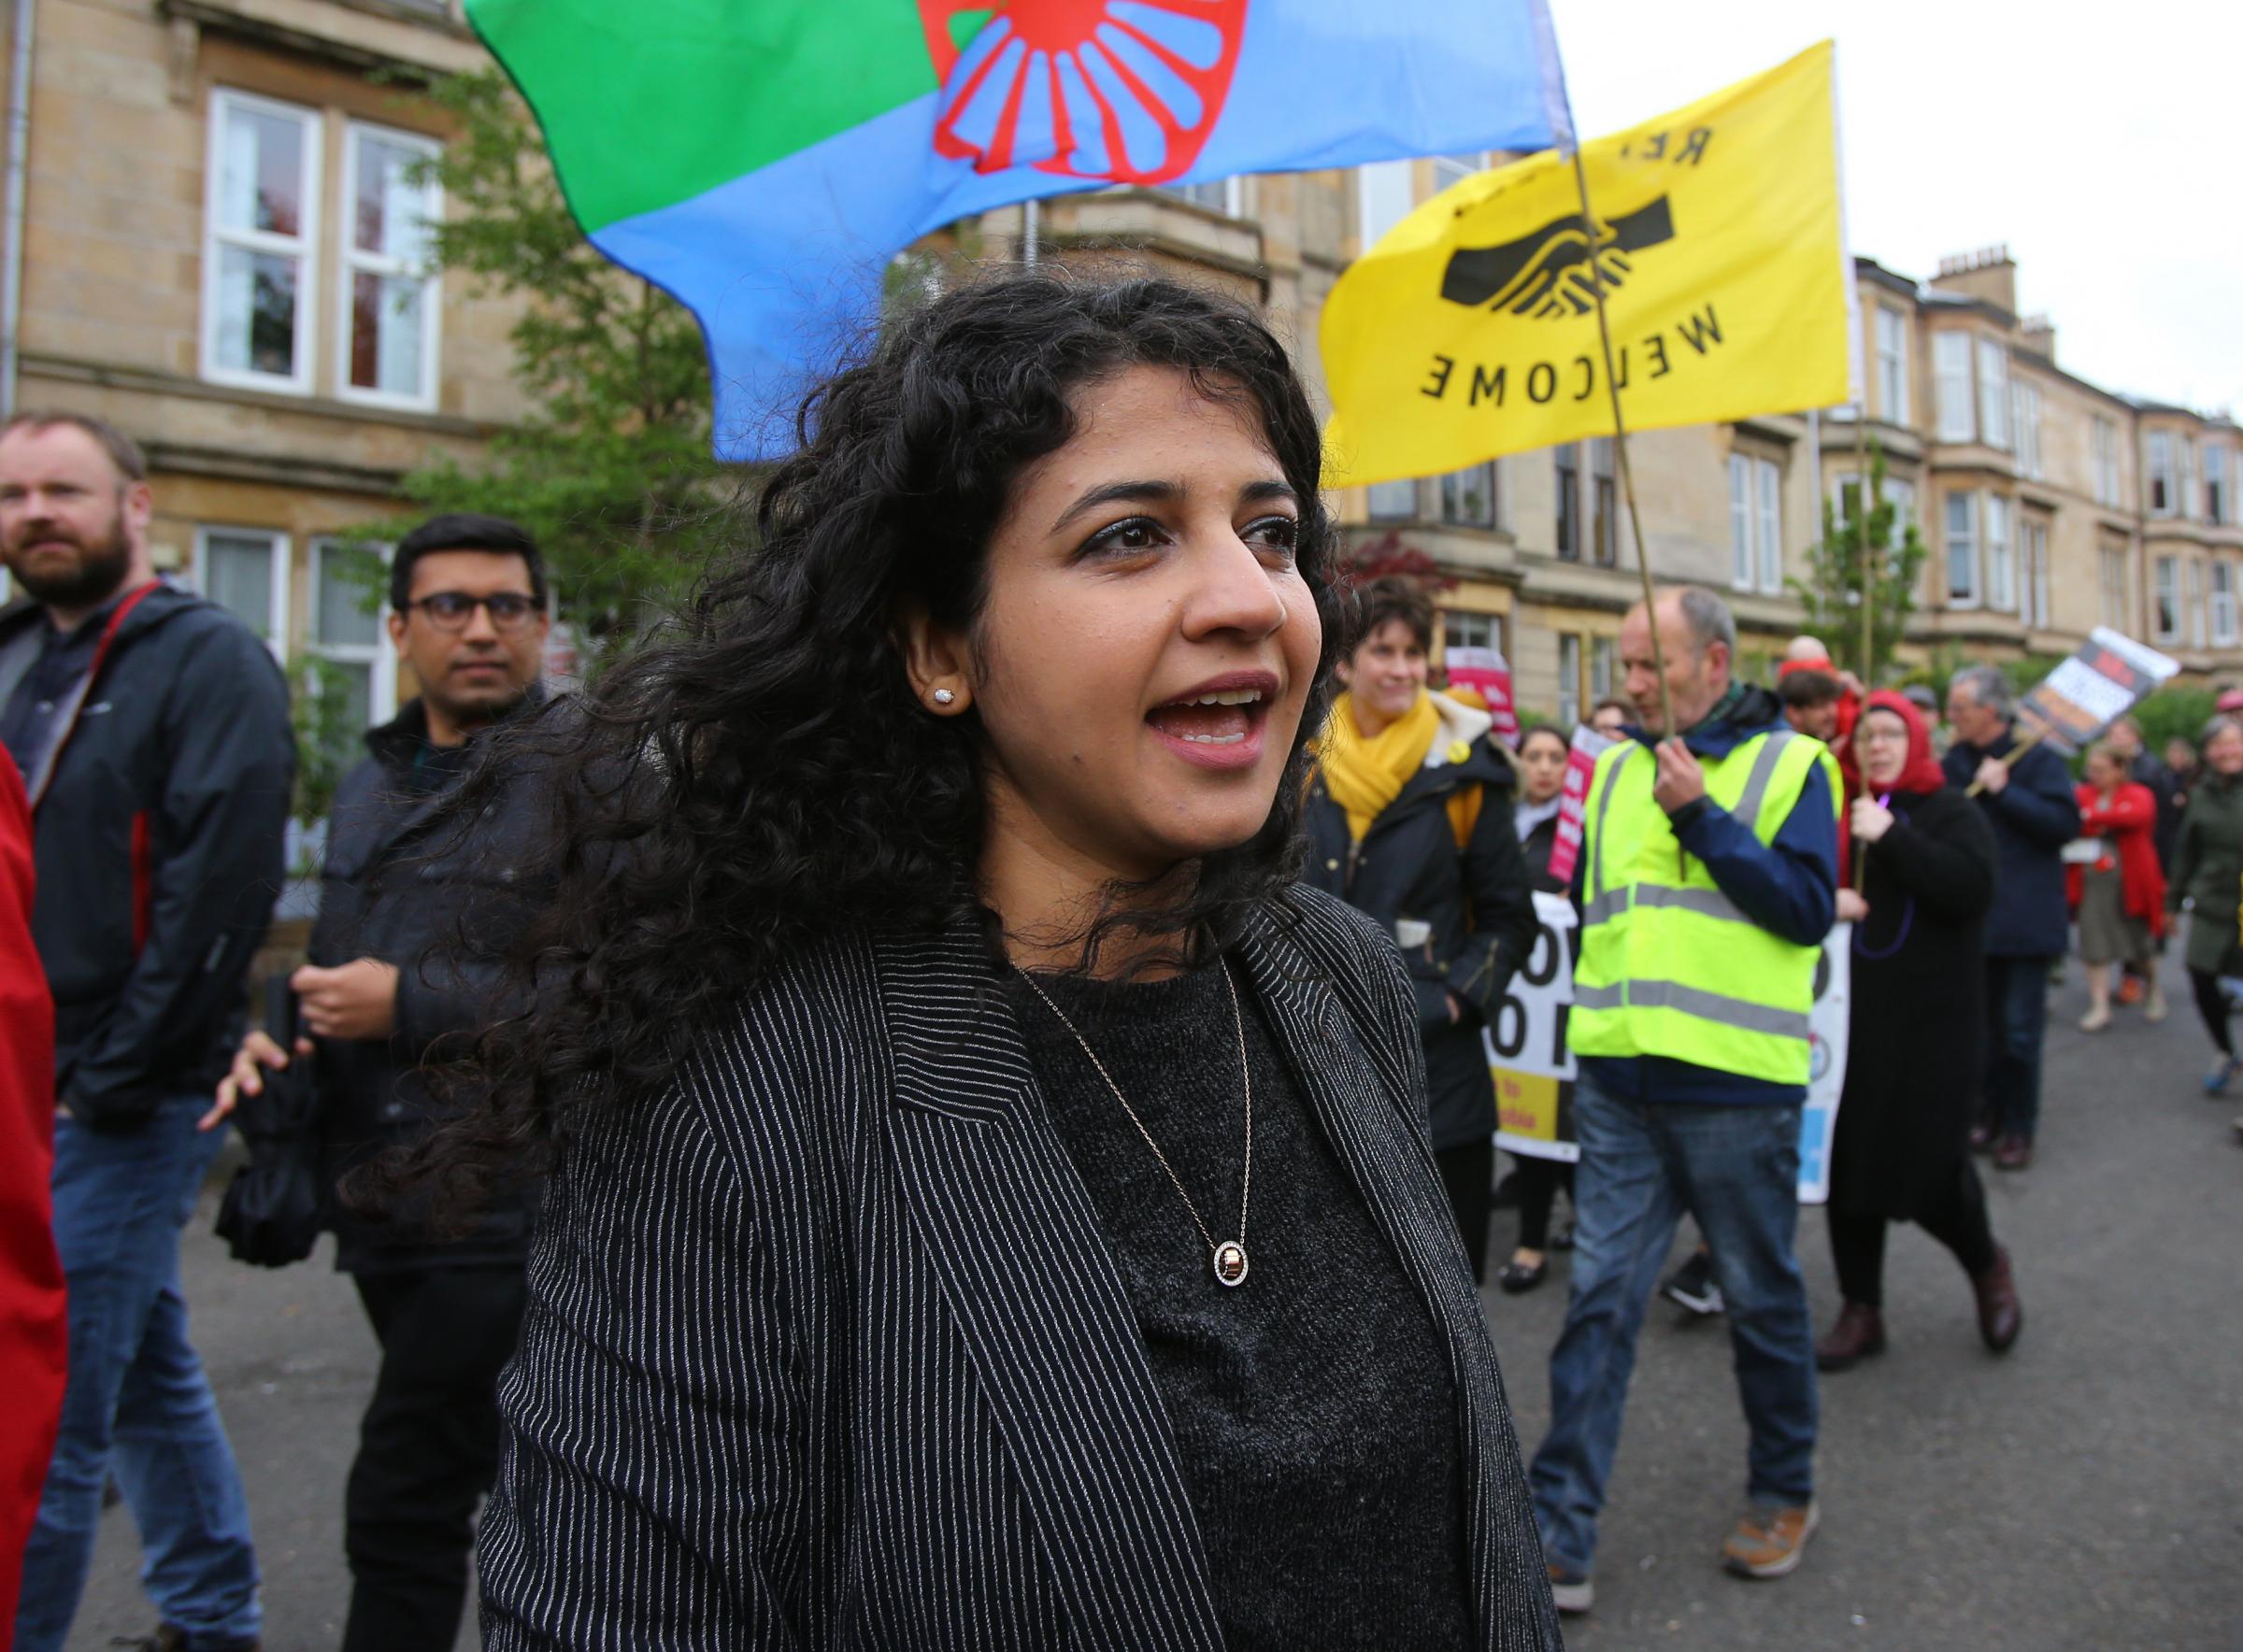 The Pollokshields Trust and Govanhill Baths Community Trust Kenmure Street Festival of Resistance. Pictured is Cllr Roza Salih. Photograph by Colin Mearns.